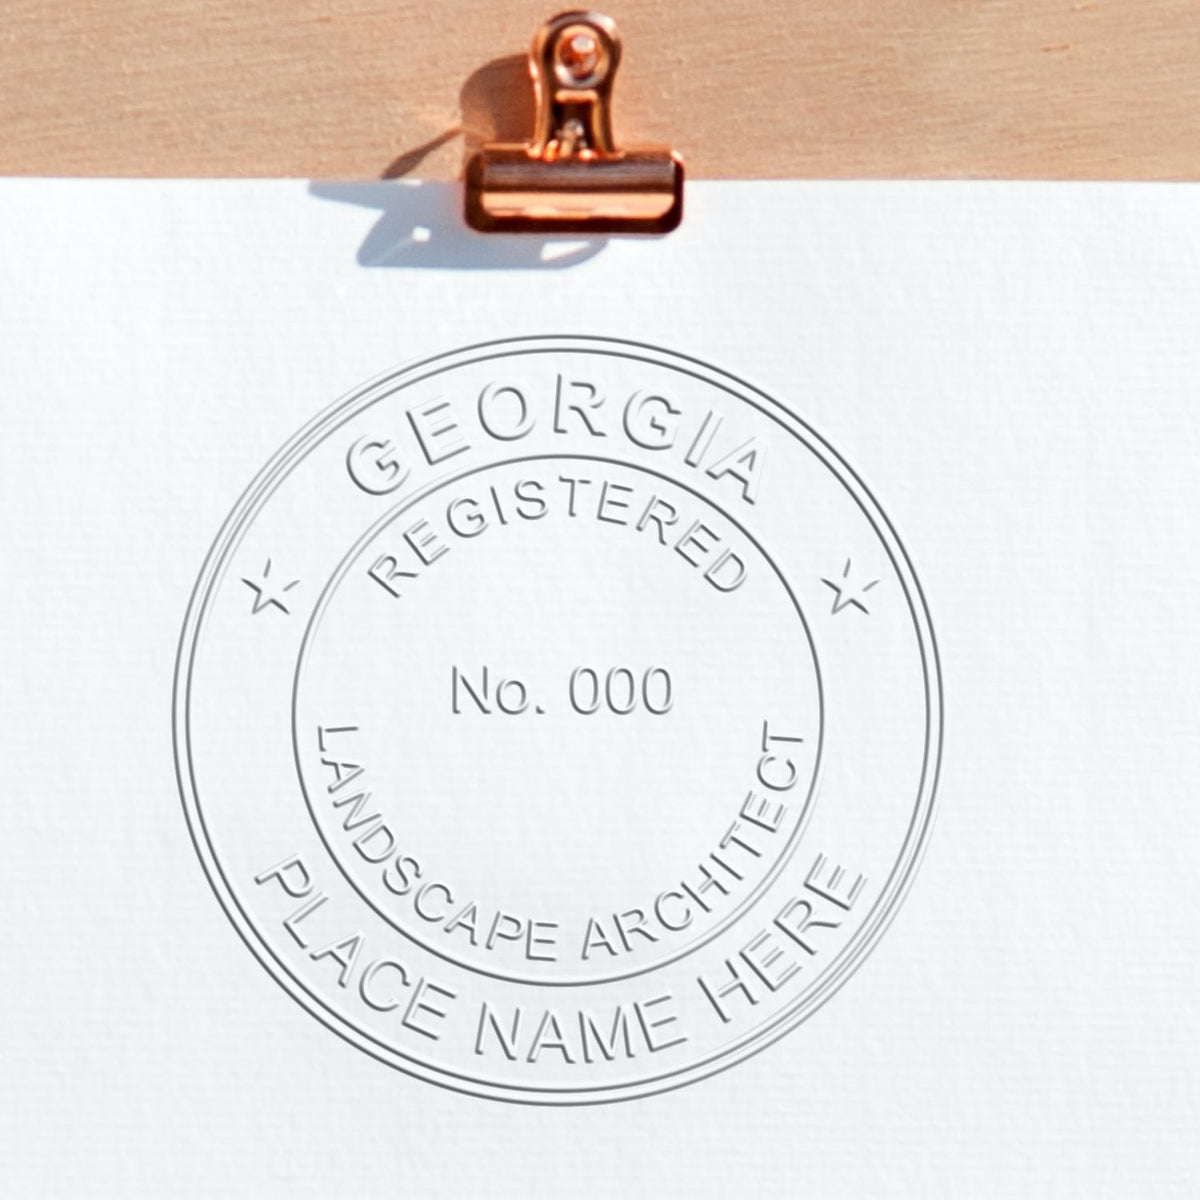 An in use photo of the Hybrid Georgia Landscape Architect Seal showing a sample imprint on a cardstock